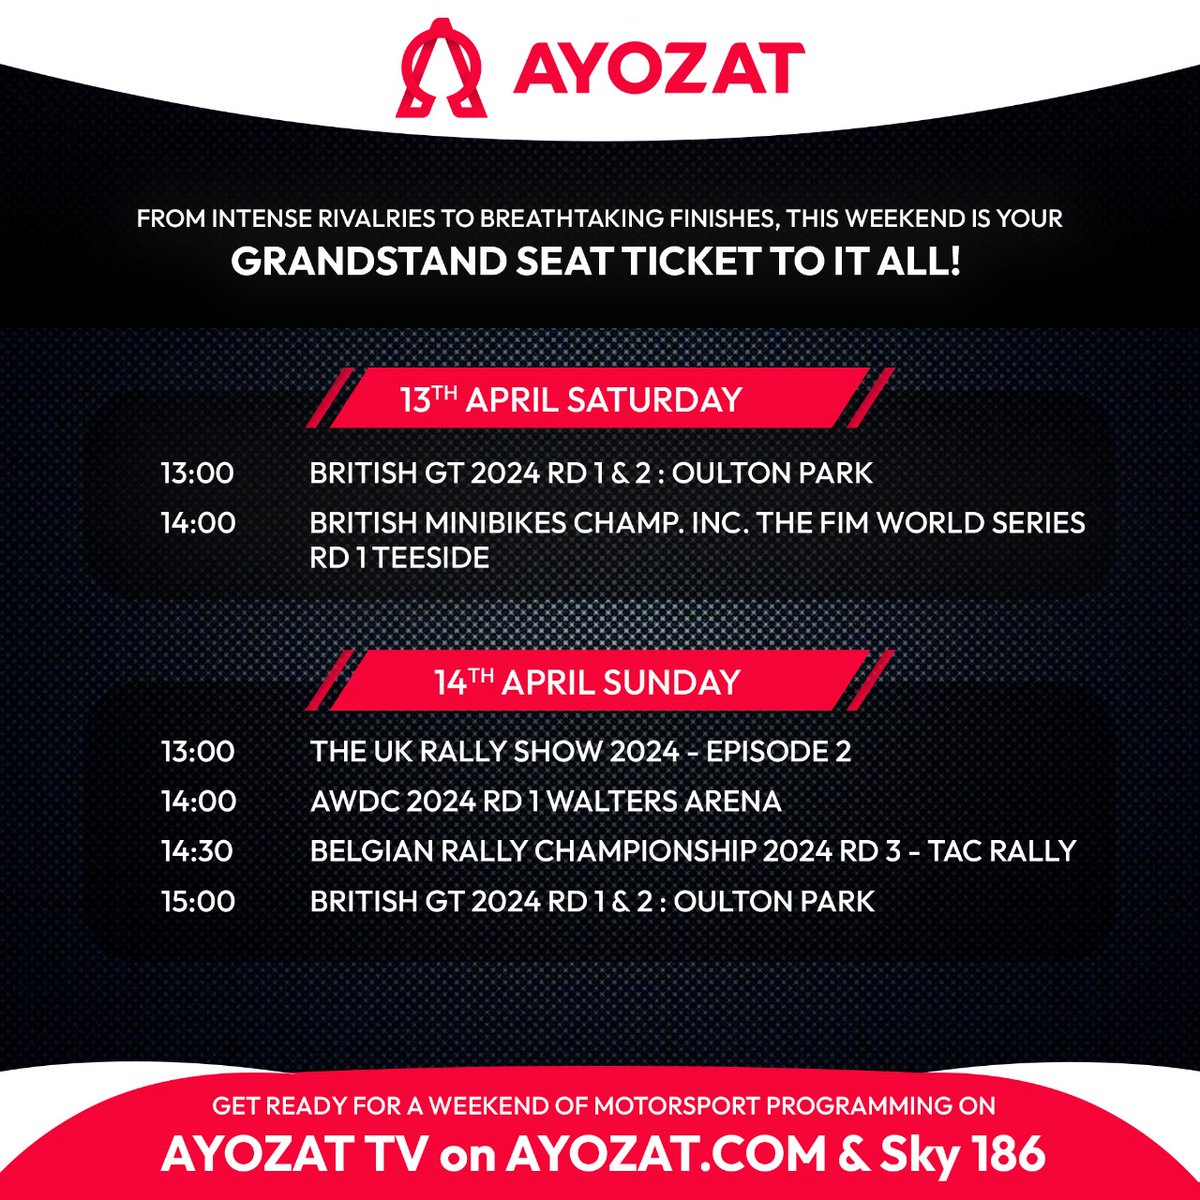 Rev up your engines! Don't miss the motorsport extravaganza this weekend, starting from 1pm on Ayozat TV at Sky 186 and ayozat.com. Tune in and fuel your passion for motorsport!
#motorsport #cars #racing #action #weekendracing